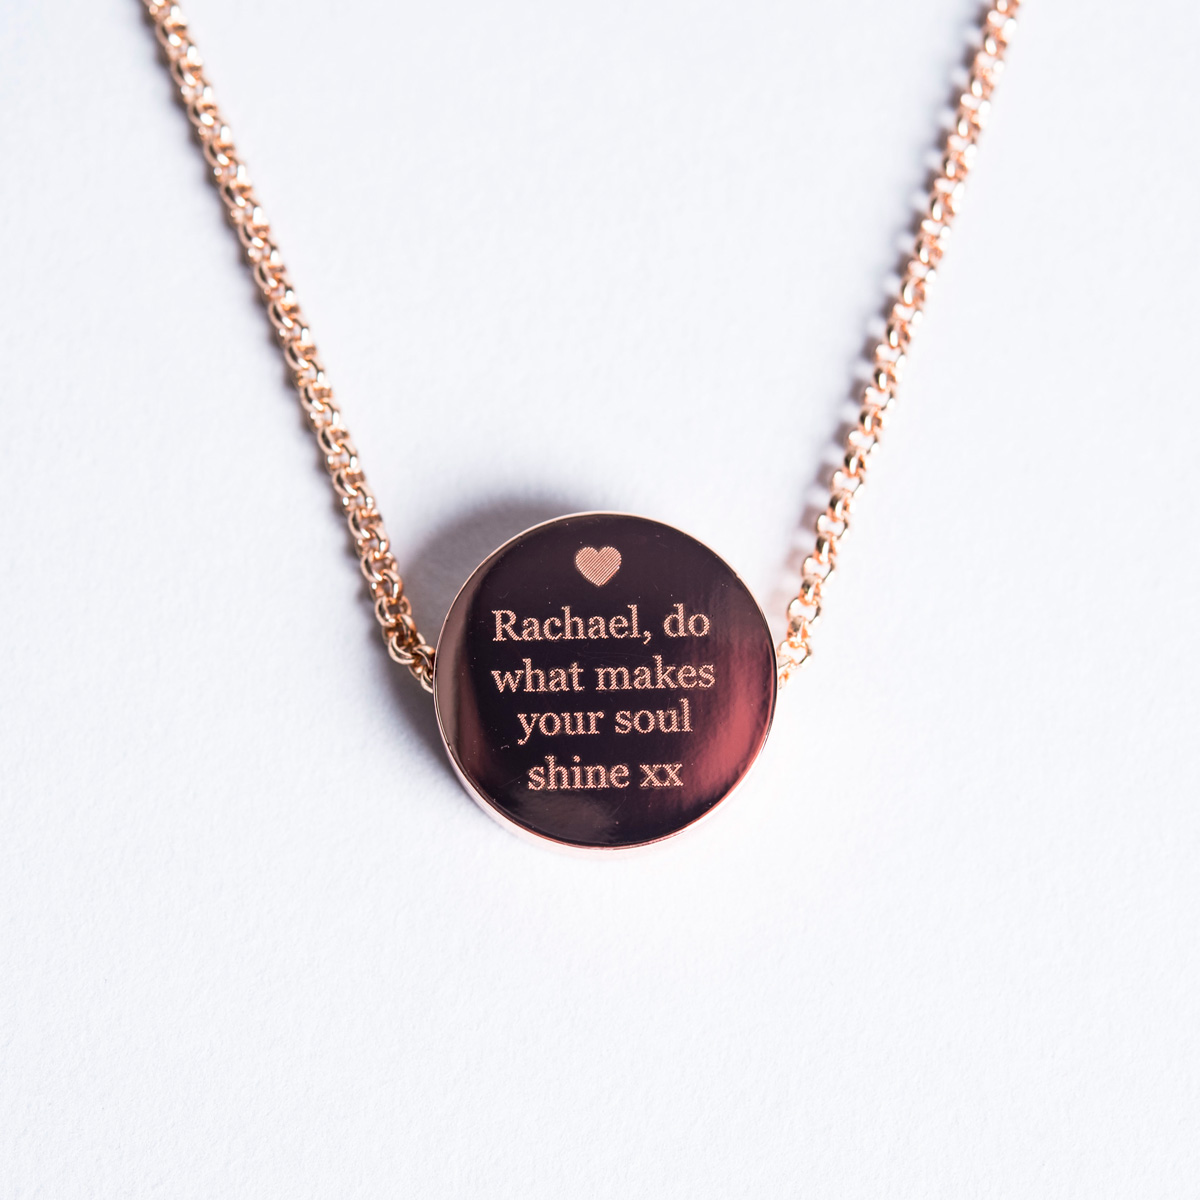 Personalised Necklace - Rose Gold Disc